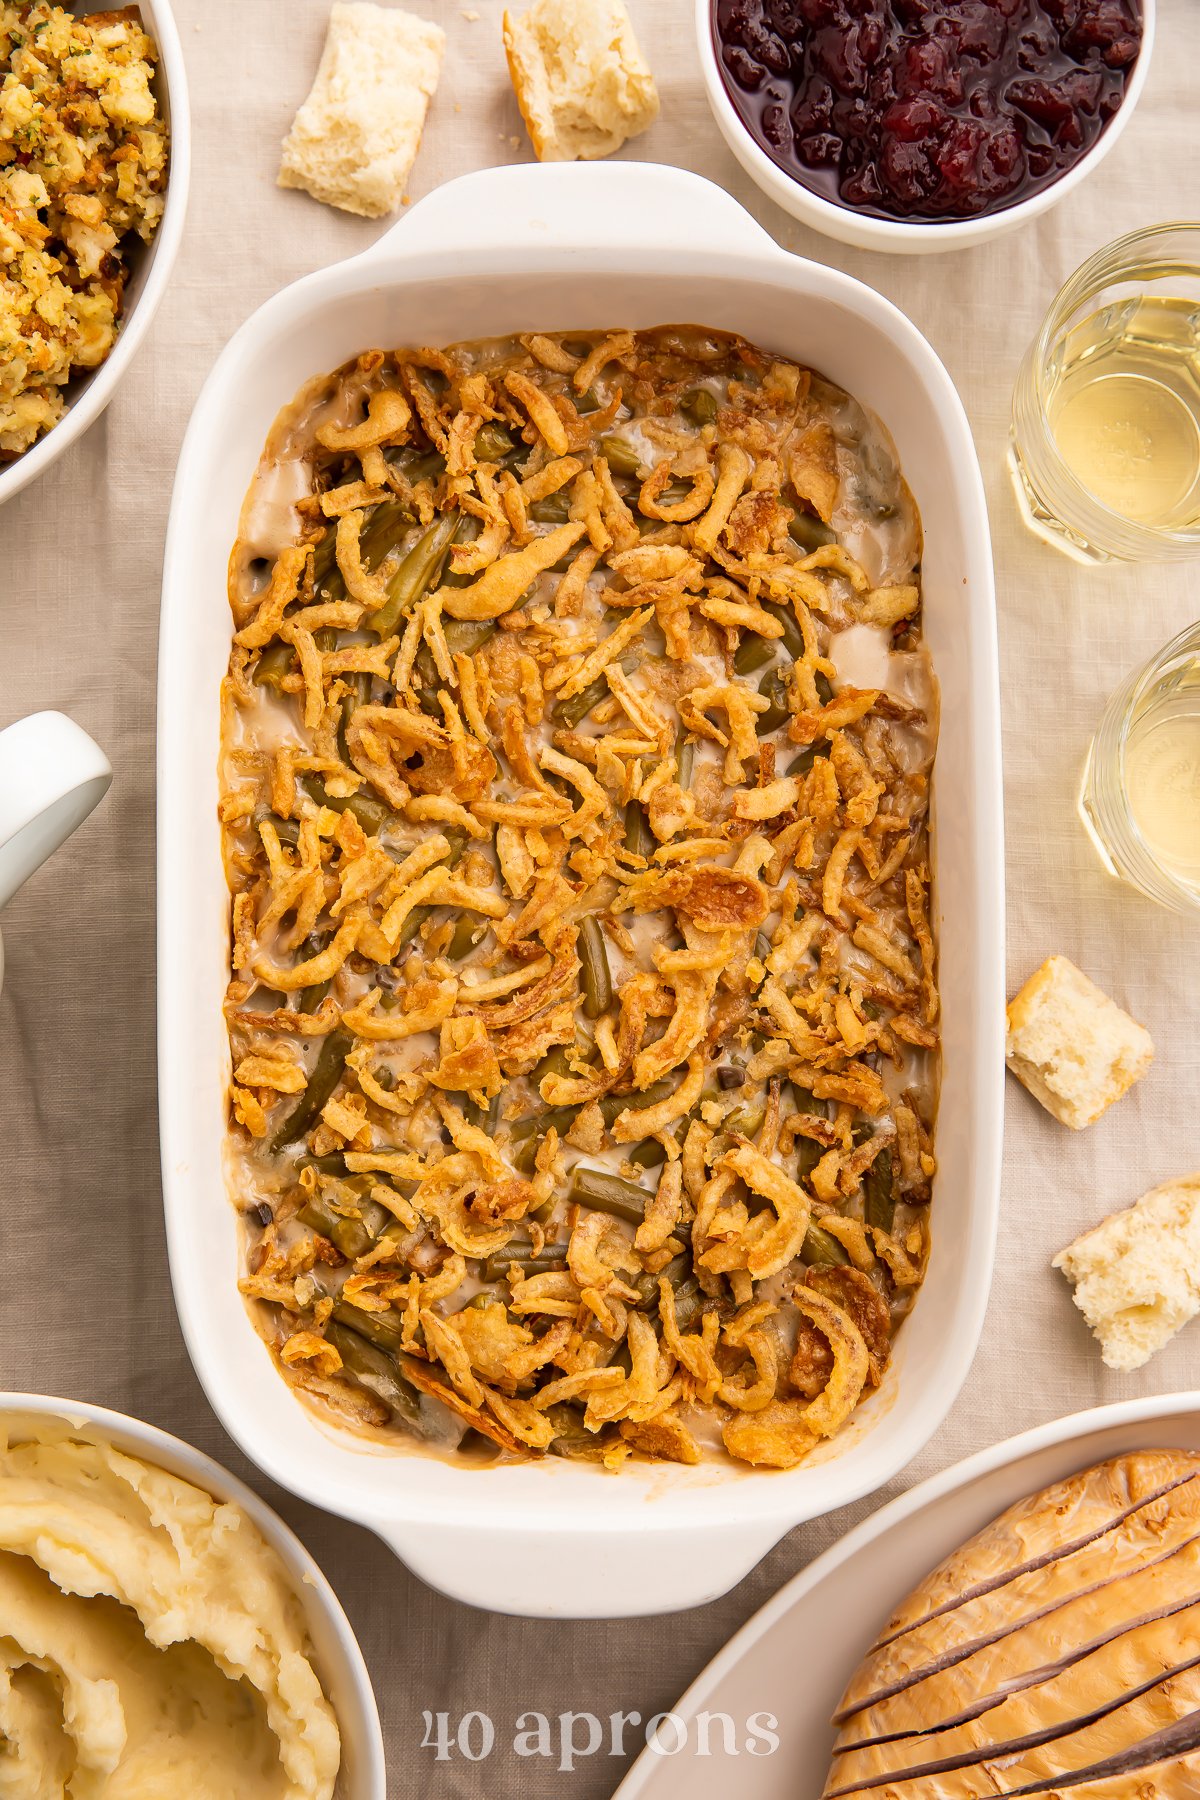 Overhead view of a large rounded rectangular casserole dish holding a make-ahead green bean casserole.